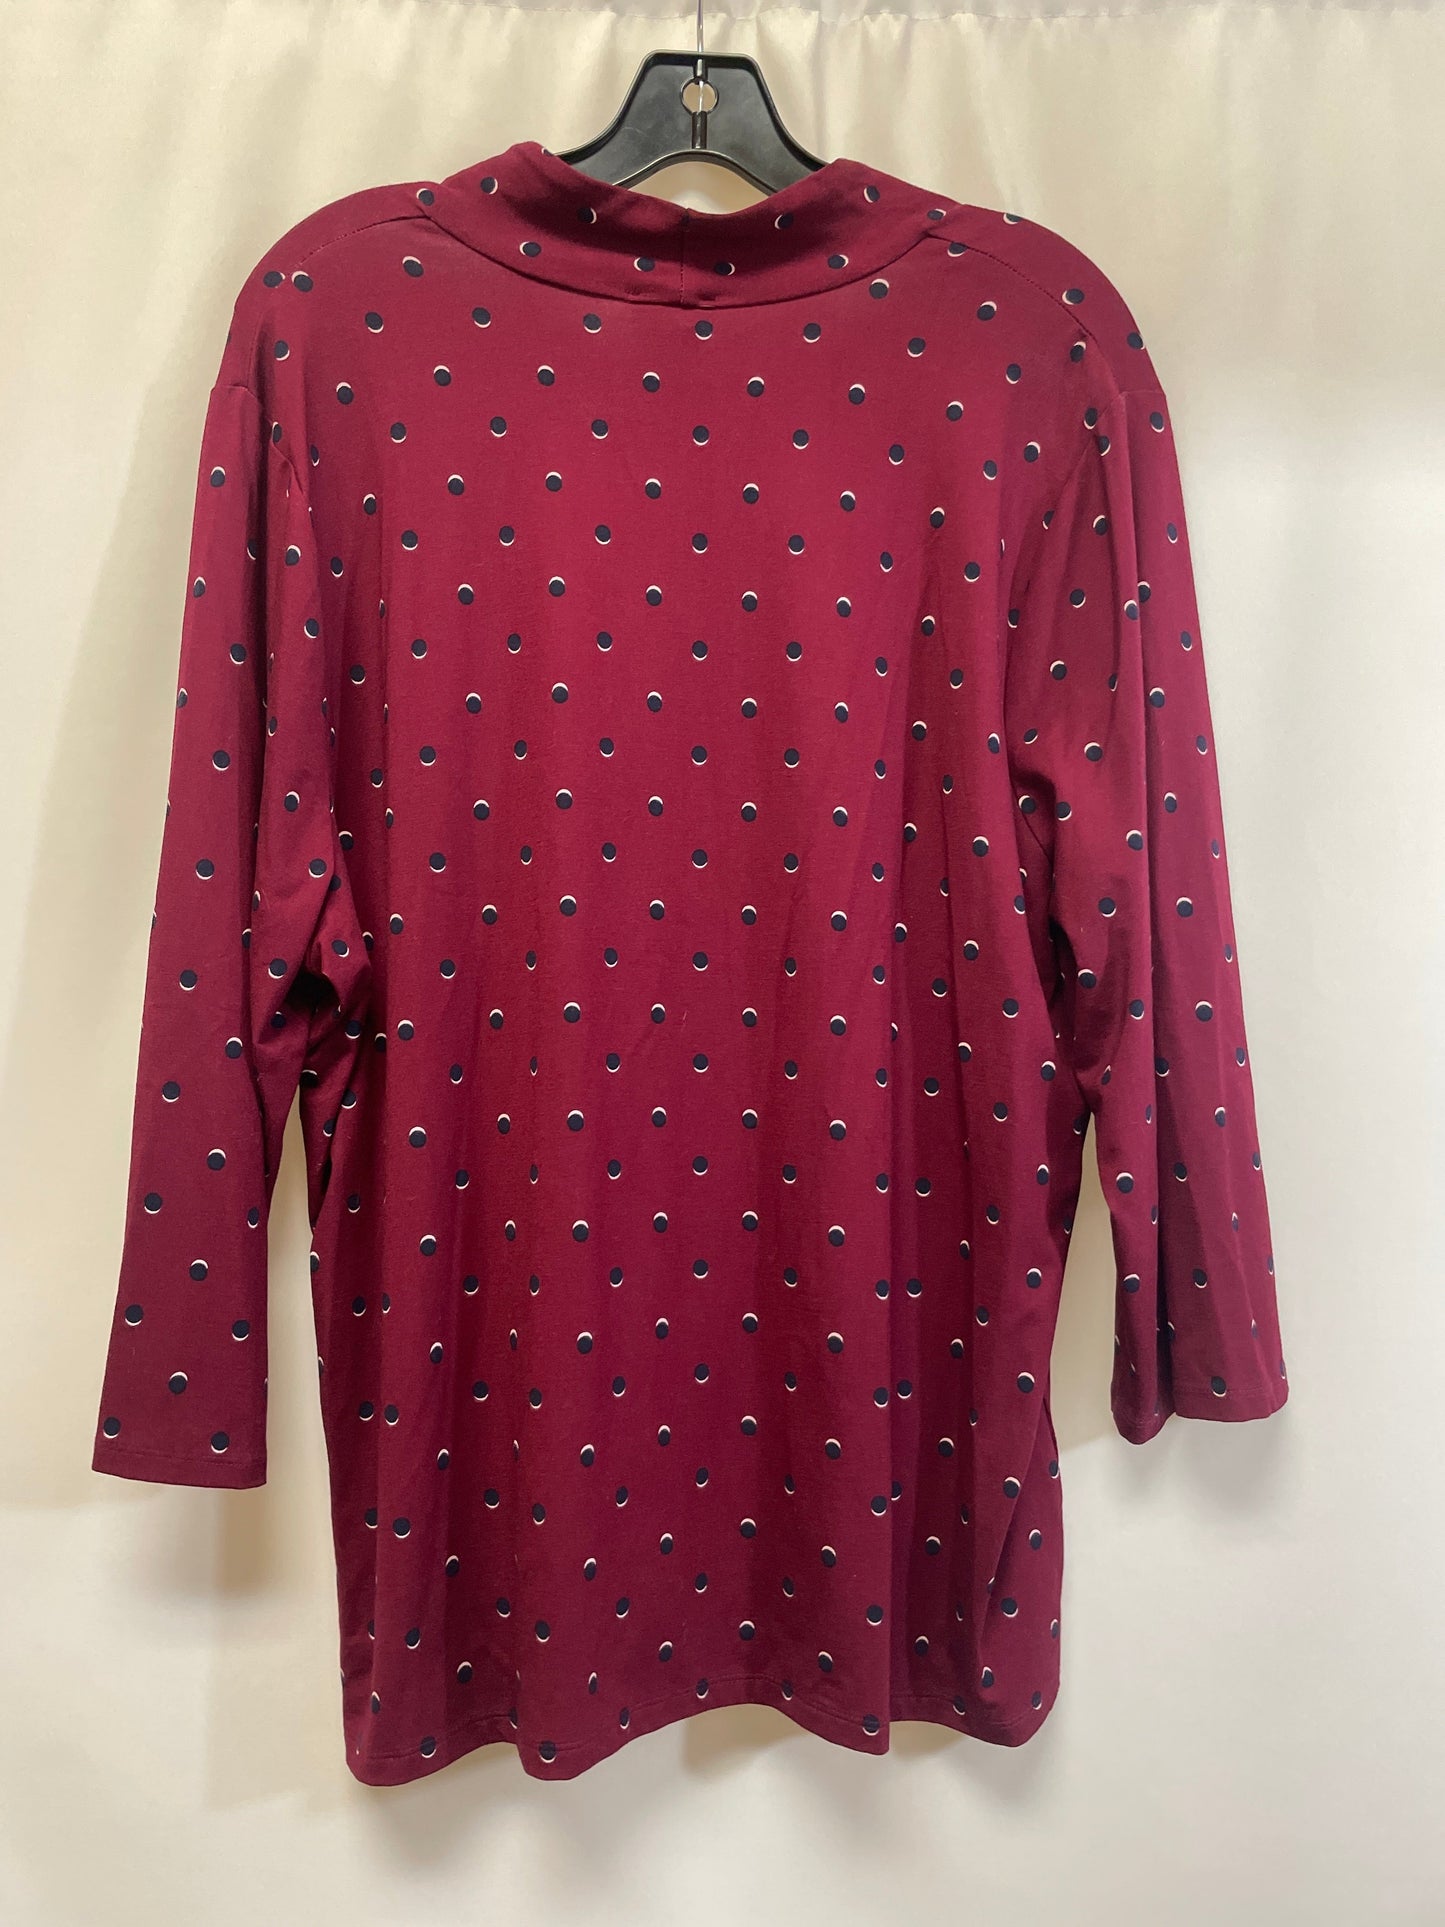 Red Top 3/4 Sleeve Talbots, Size 2x